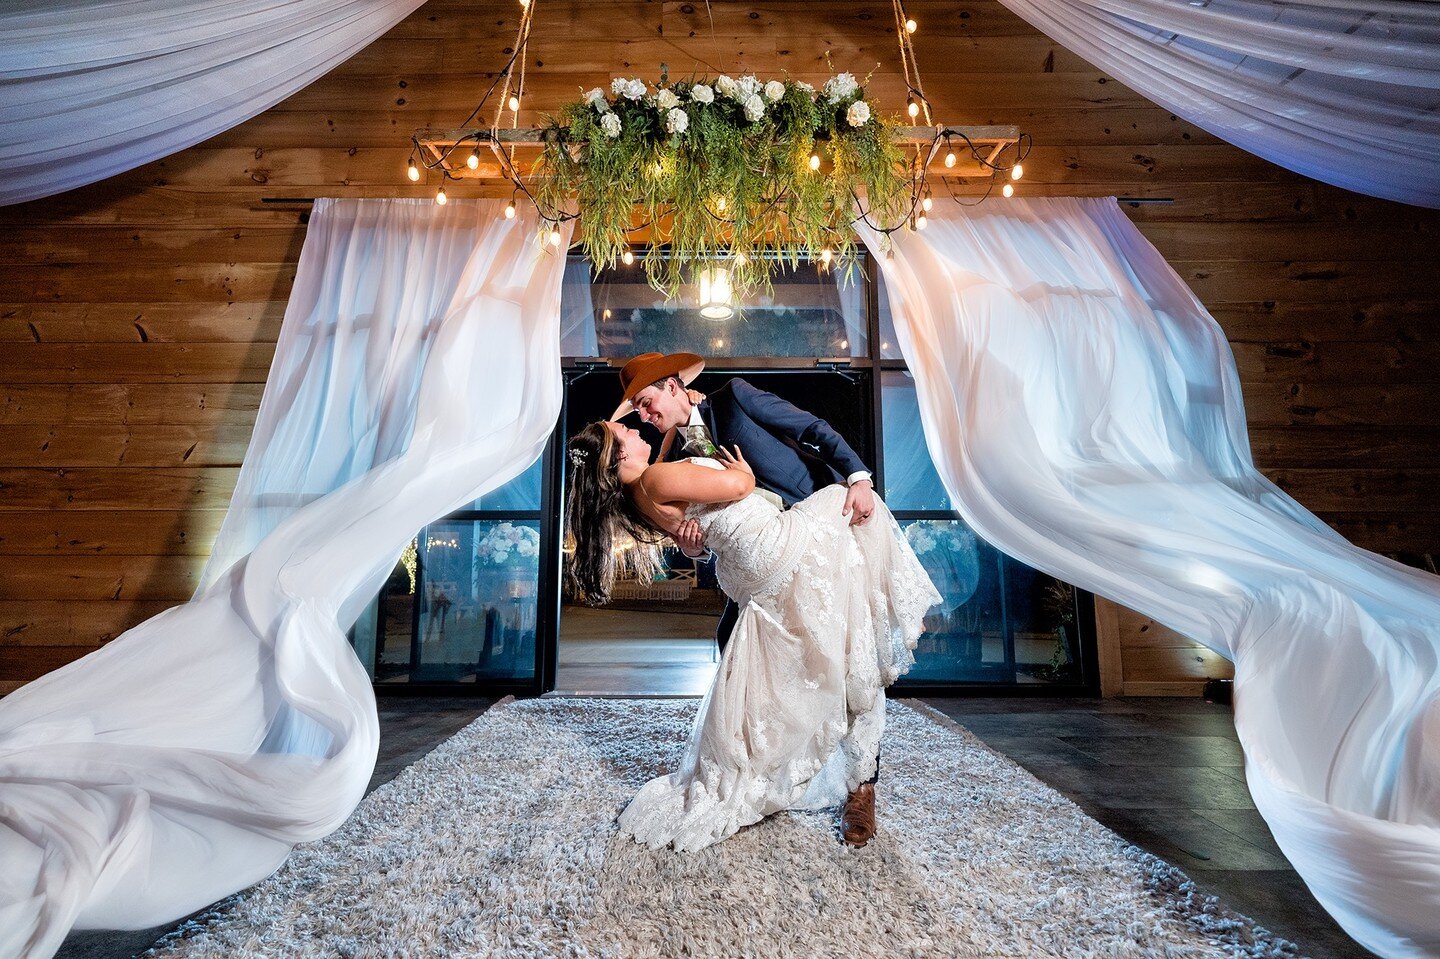 Chad and Bailey's wedding was one for the books!! Everything from tears of joy, special and precious moments, all the way to insane curtains, ripped pants, spilled drinks! You both are such amazing people and I thank you so so much!
.
.
.
Second shoo